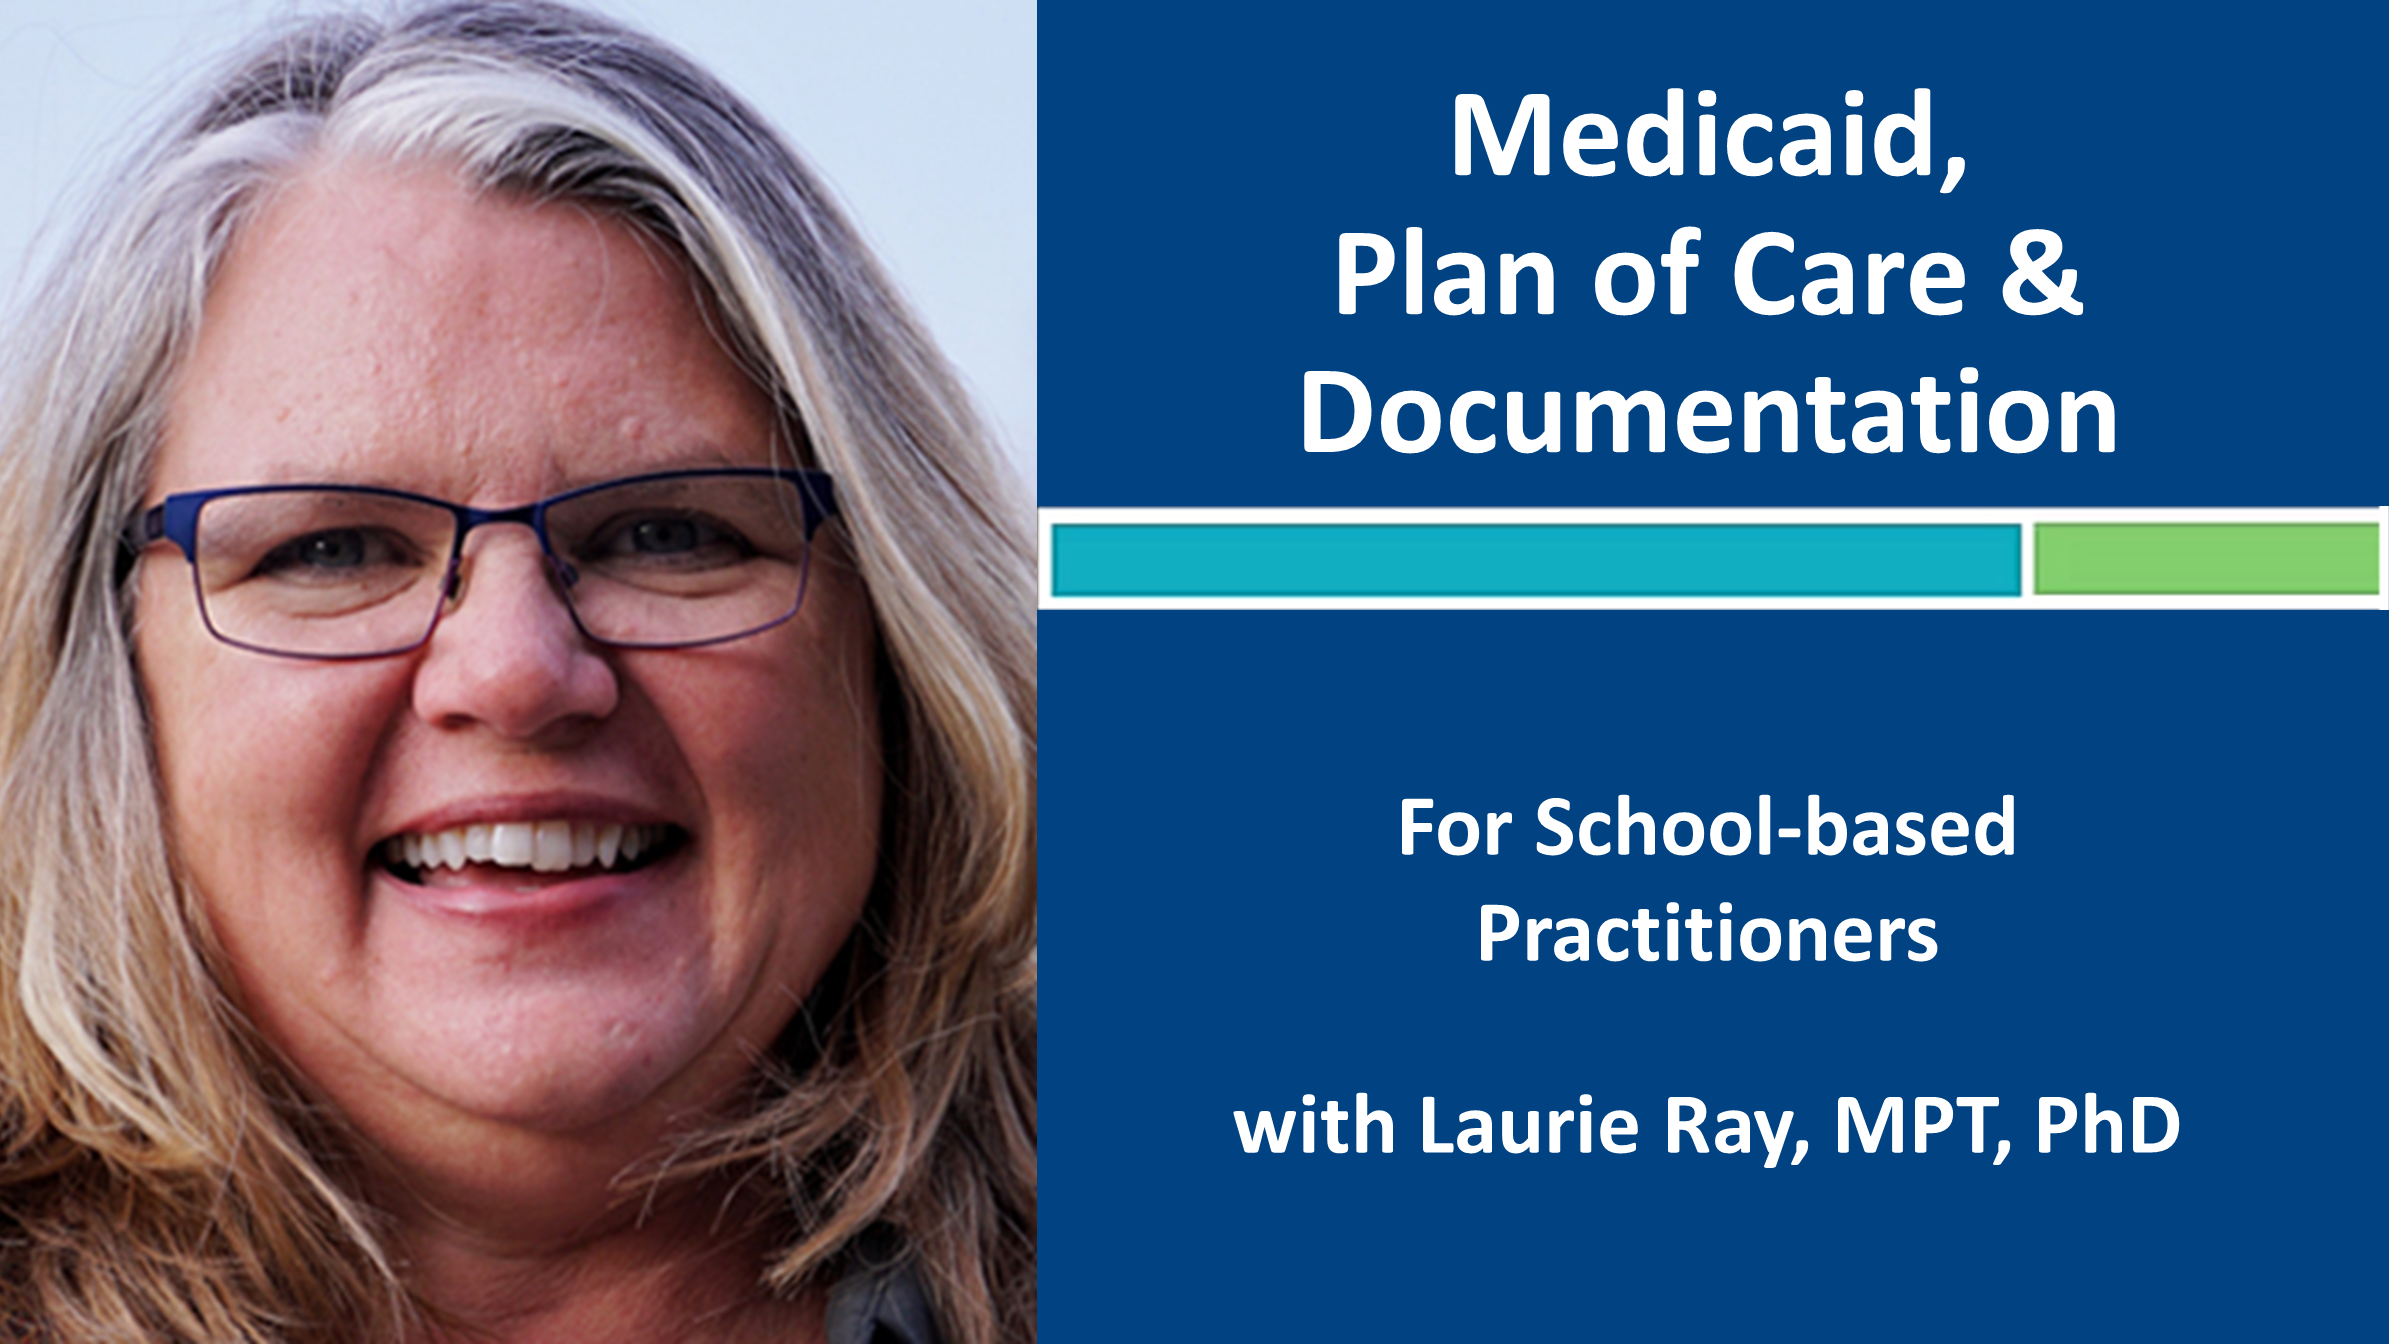 Webinar 3: Medicaid, Plan of Care and Documentation with Laurie Ray, MPT, PhD